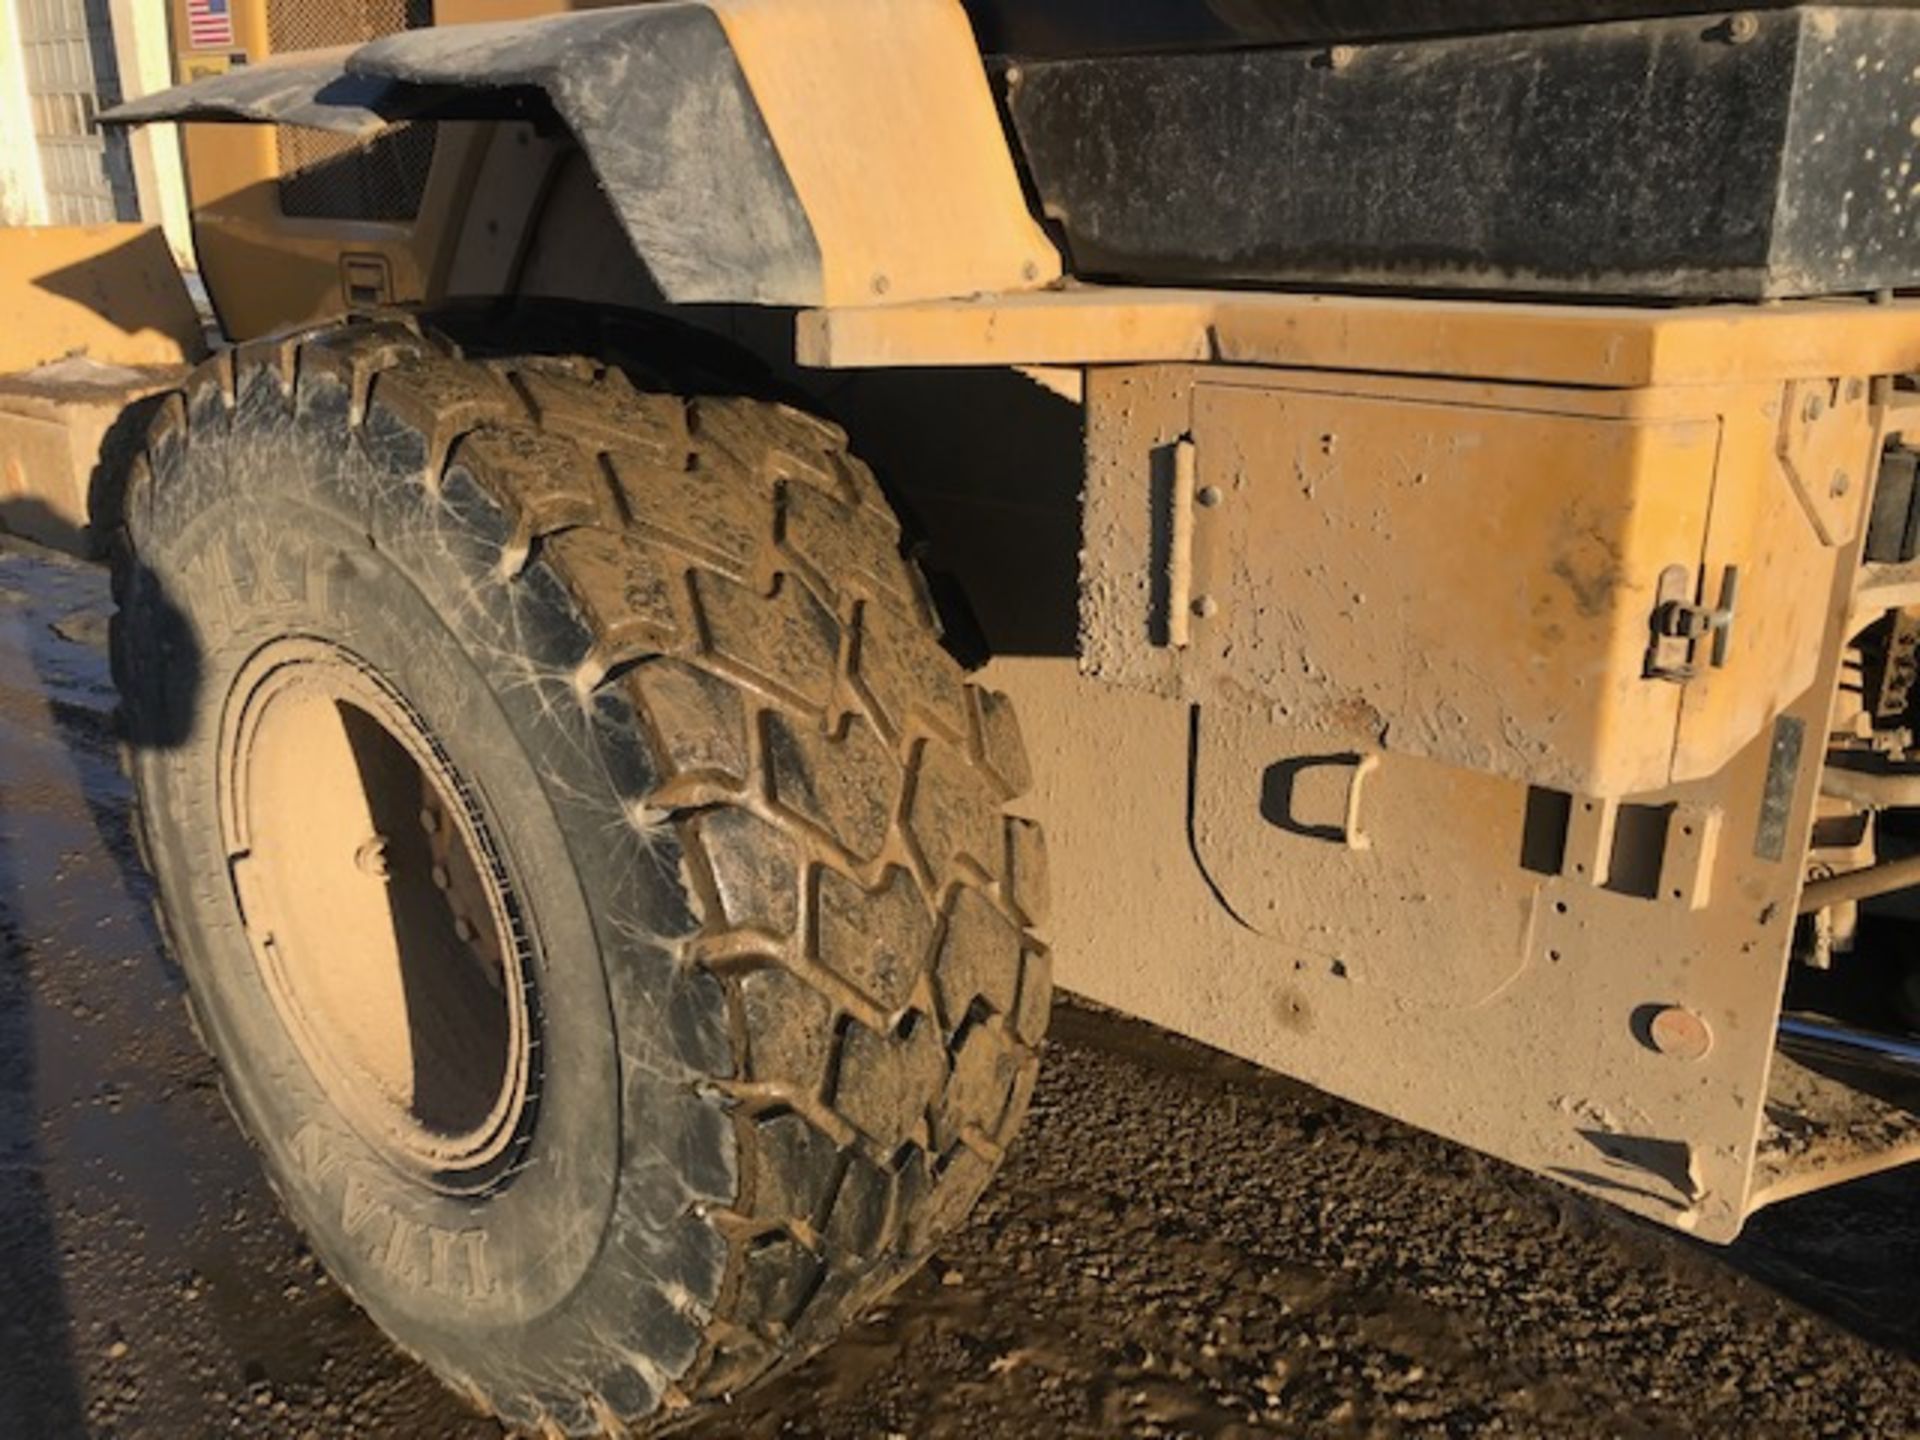 2014 Caterpillar 938K Rubber Tire, Articulated Loader with 6 Yard Bucket. Hours: 6,230 - See Desc. - Image 3 of 8